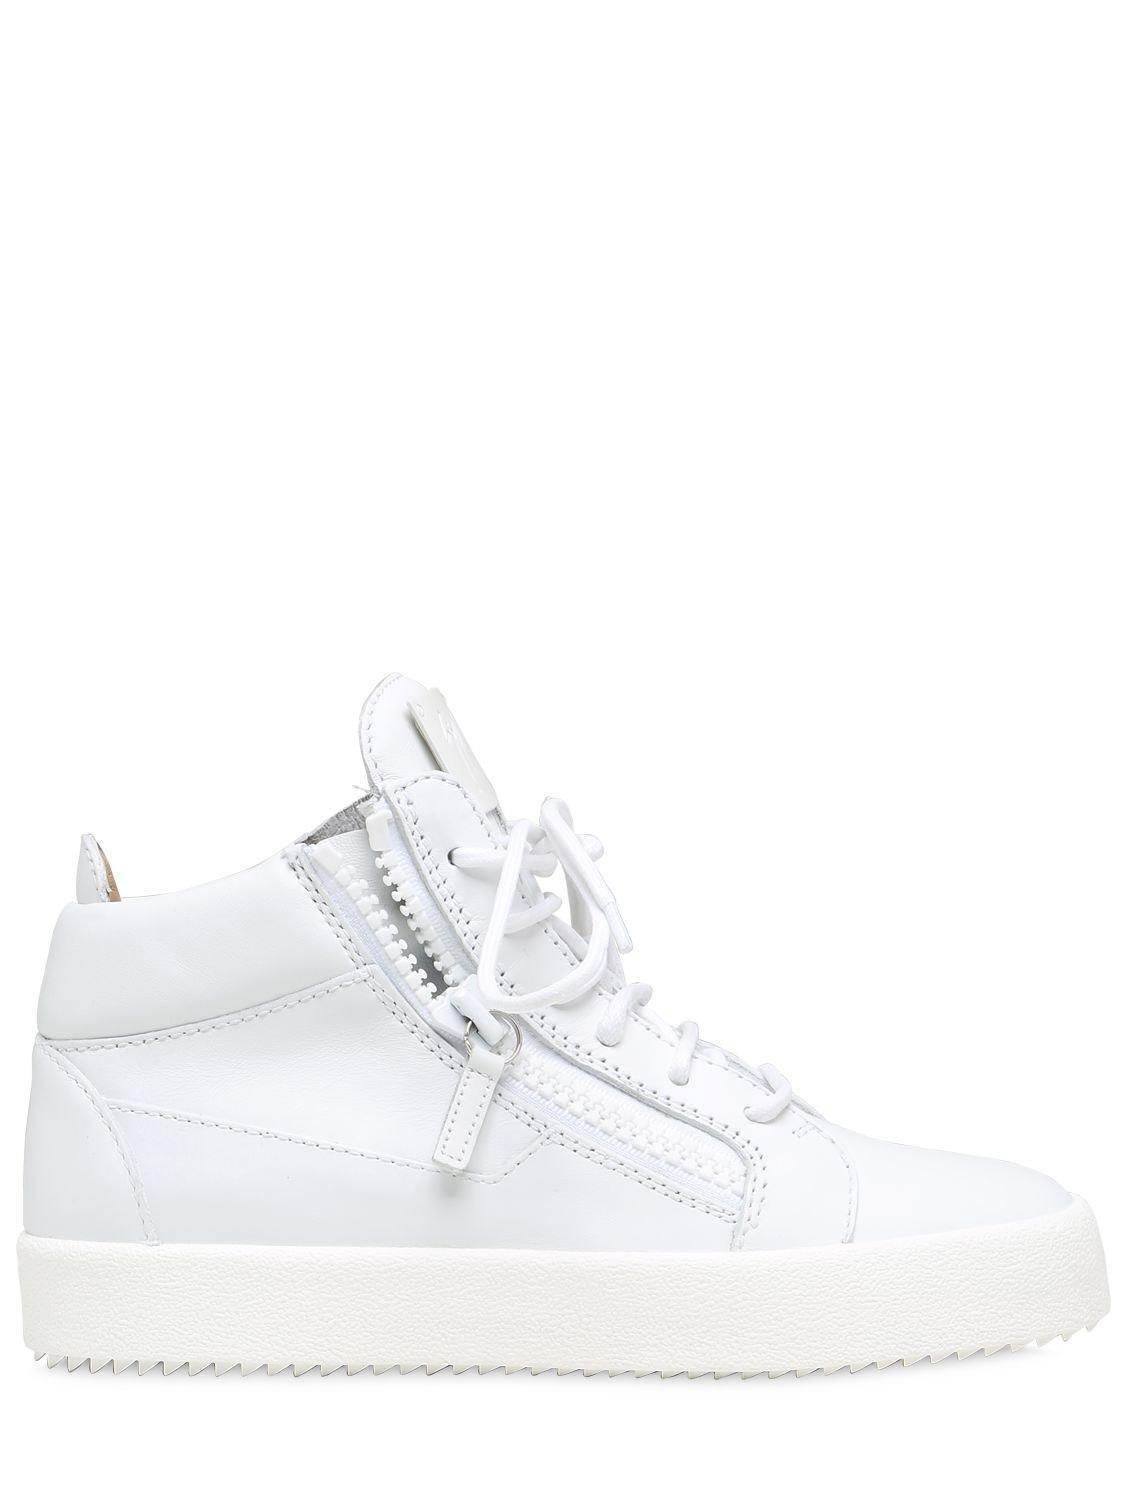 Lyst - Giuseppe Zanotti 20mm Leather Mid Top Sneakers in White